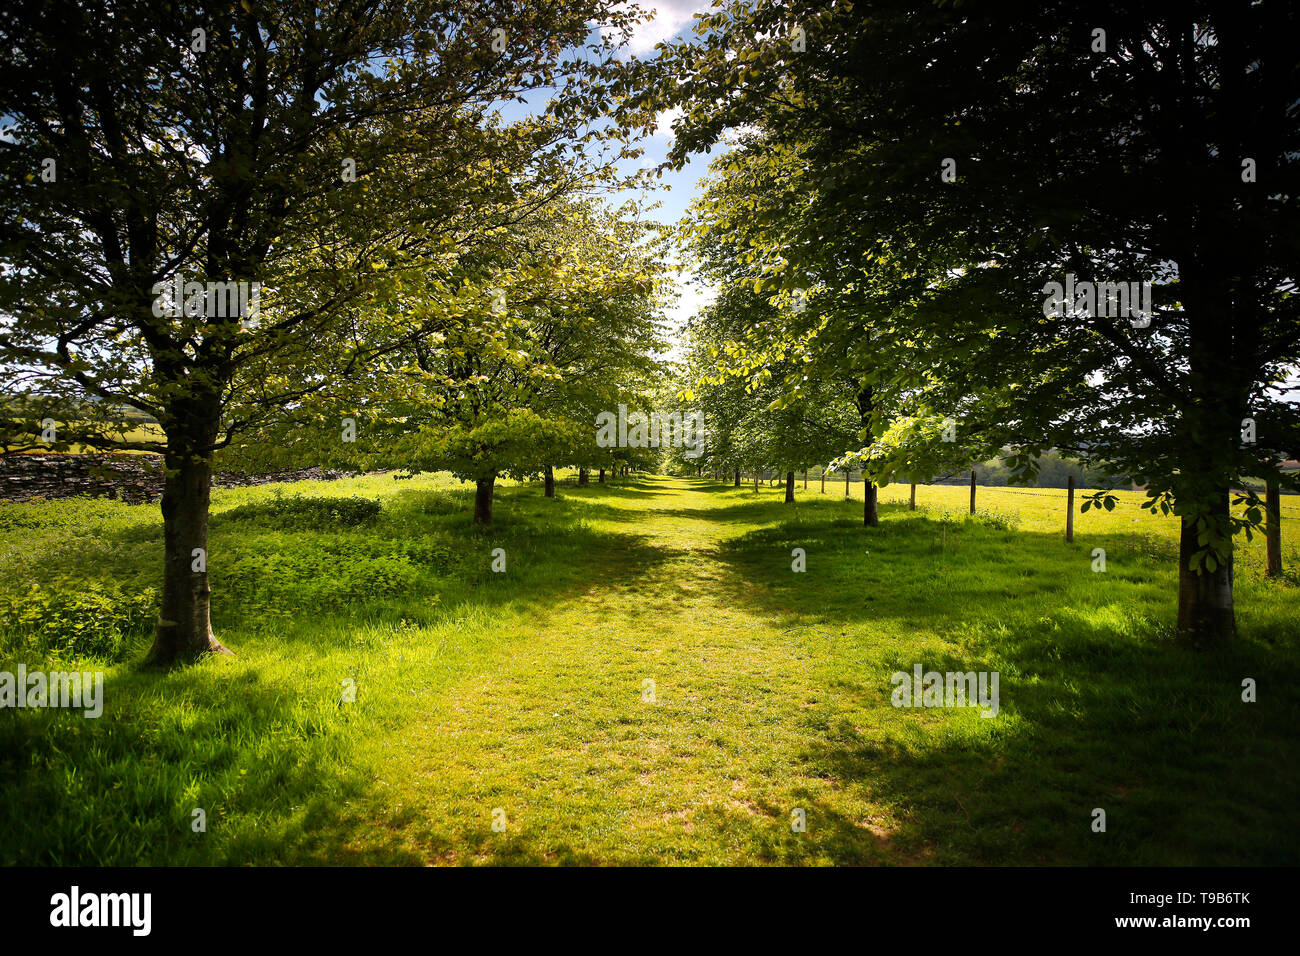 Countryside in Devon, UK, showing an avenue of trees. Stock Photo